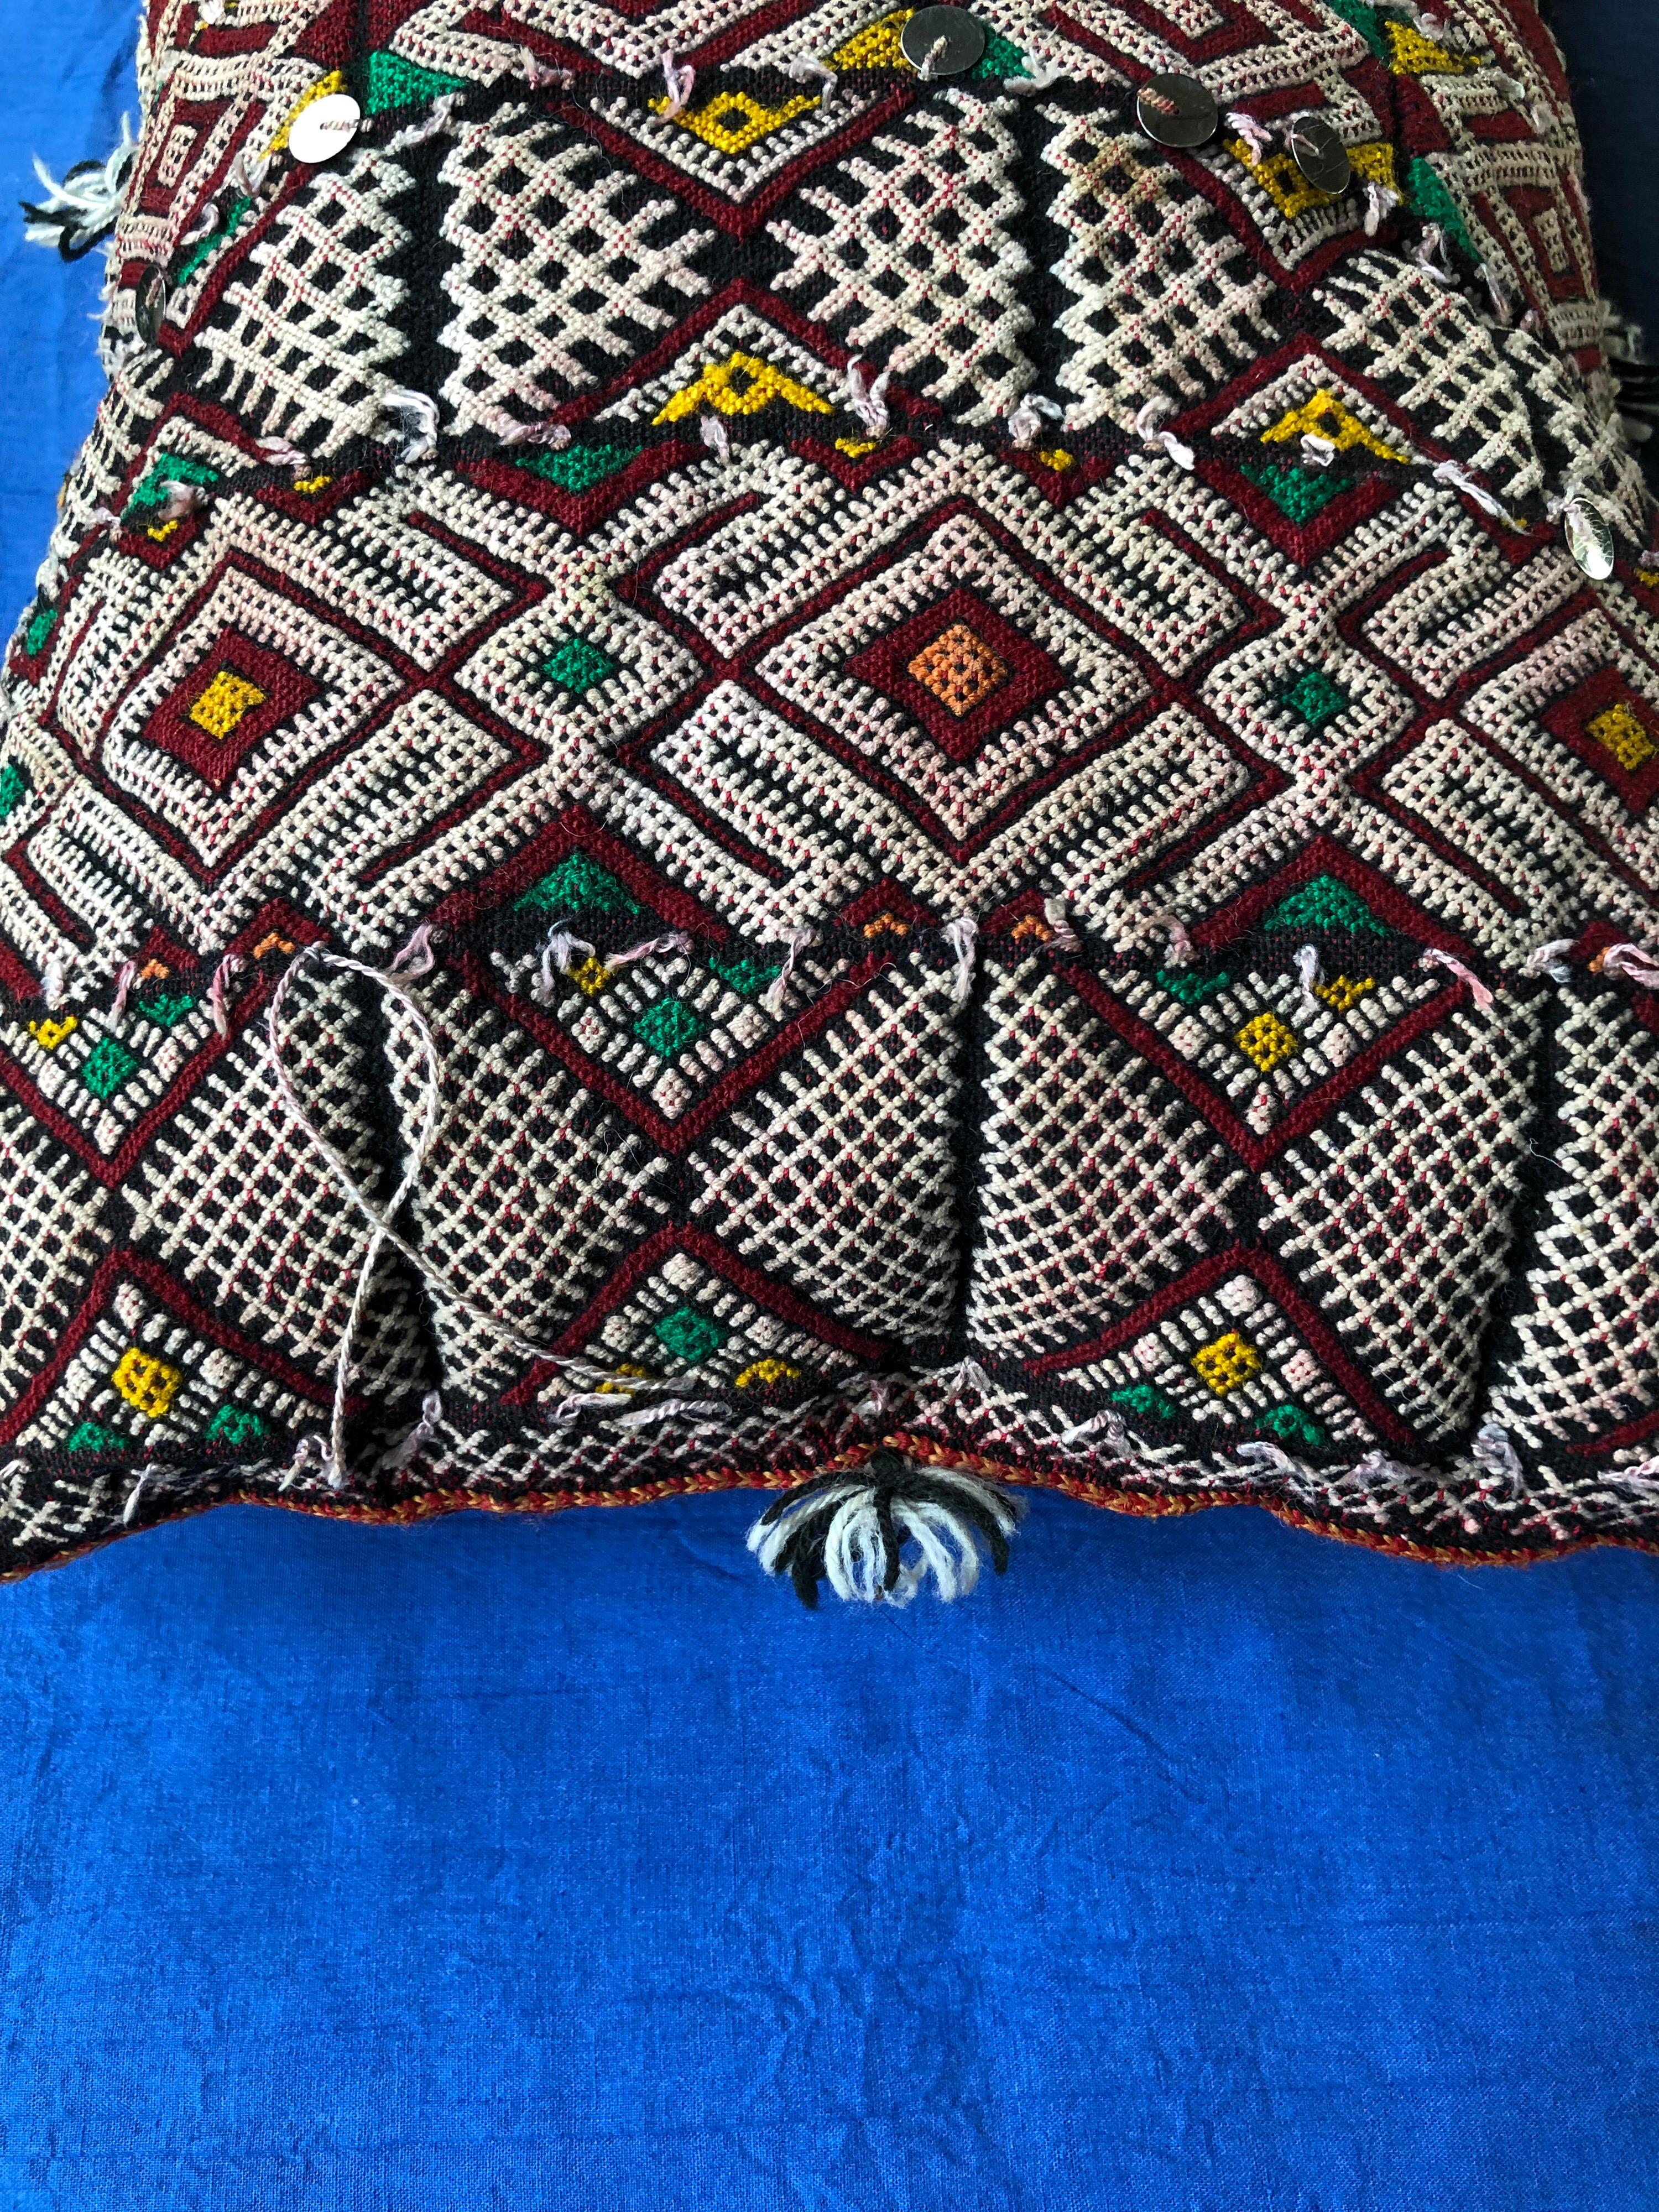 20th Century Vintage Moroccan Kilim Sequined Throw Pillow Handwoven Wool Berber Tribal Boho For Sale